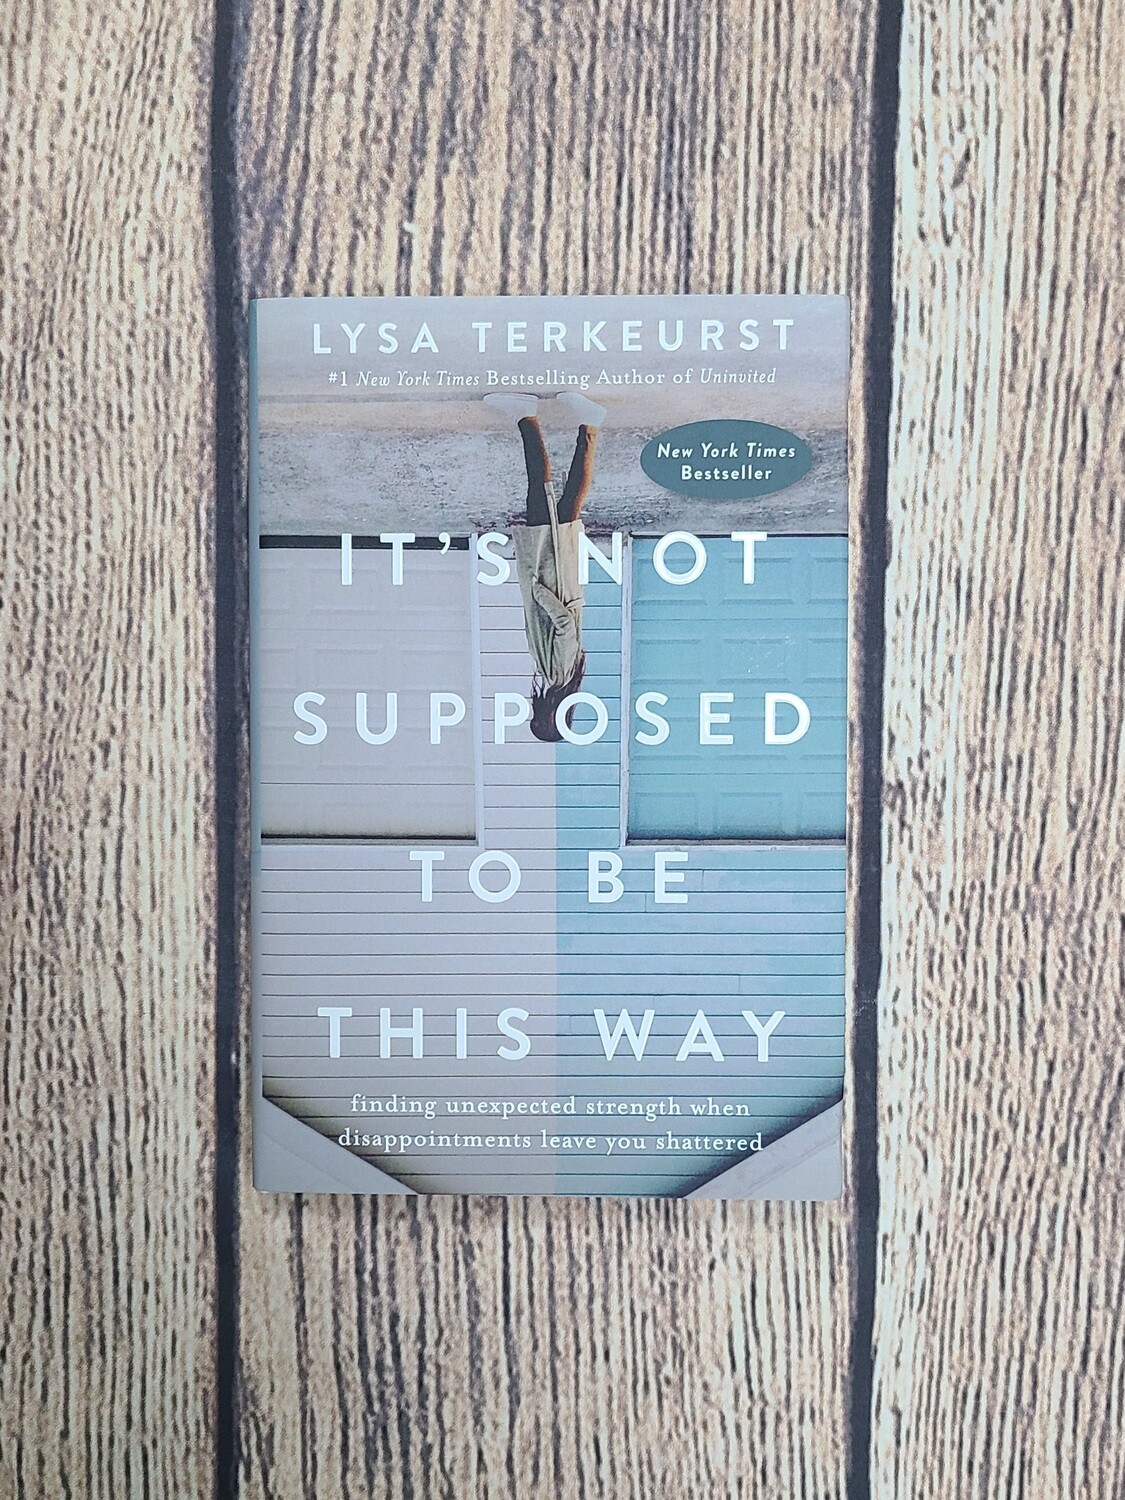 It's Not Supposed to be This Way by Lysa Terkeurst